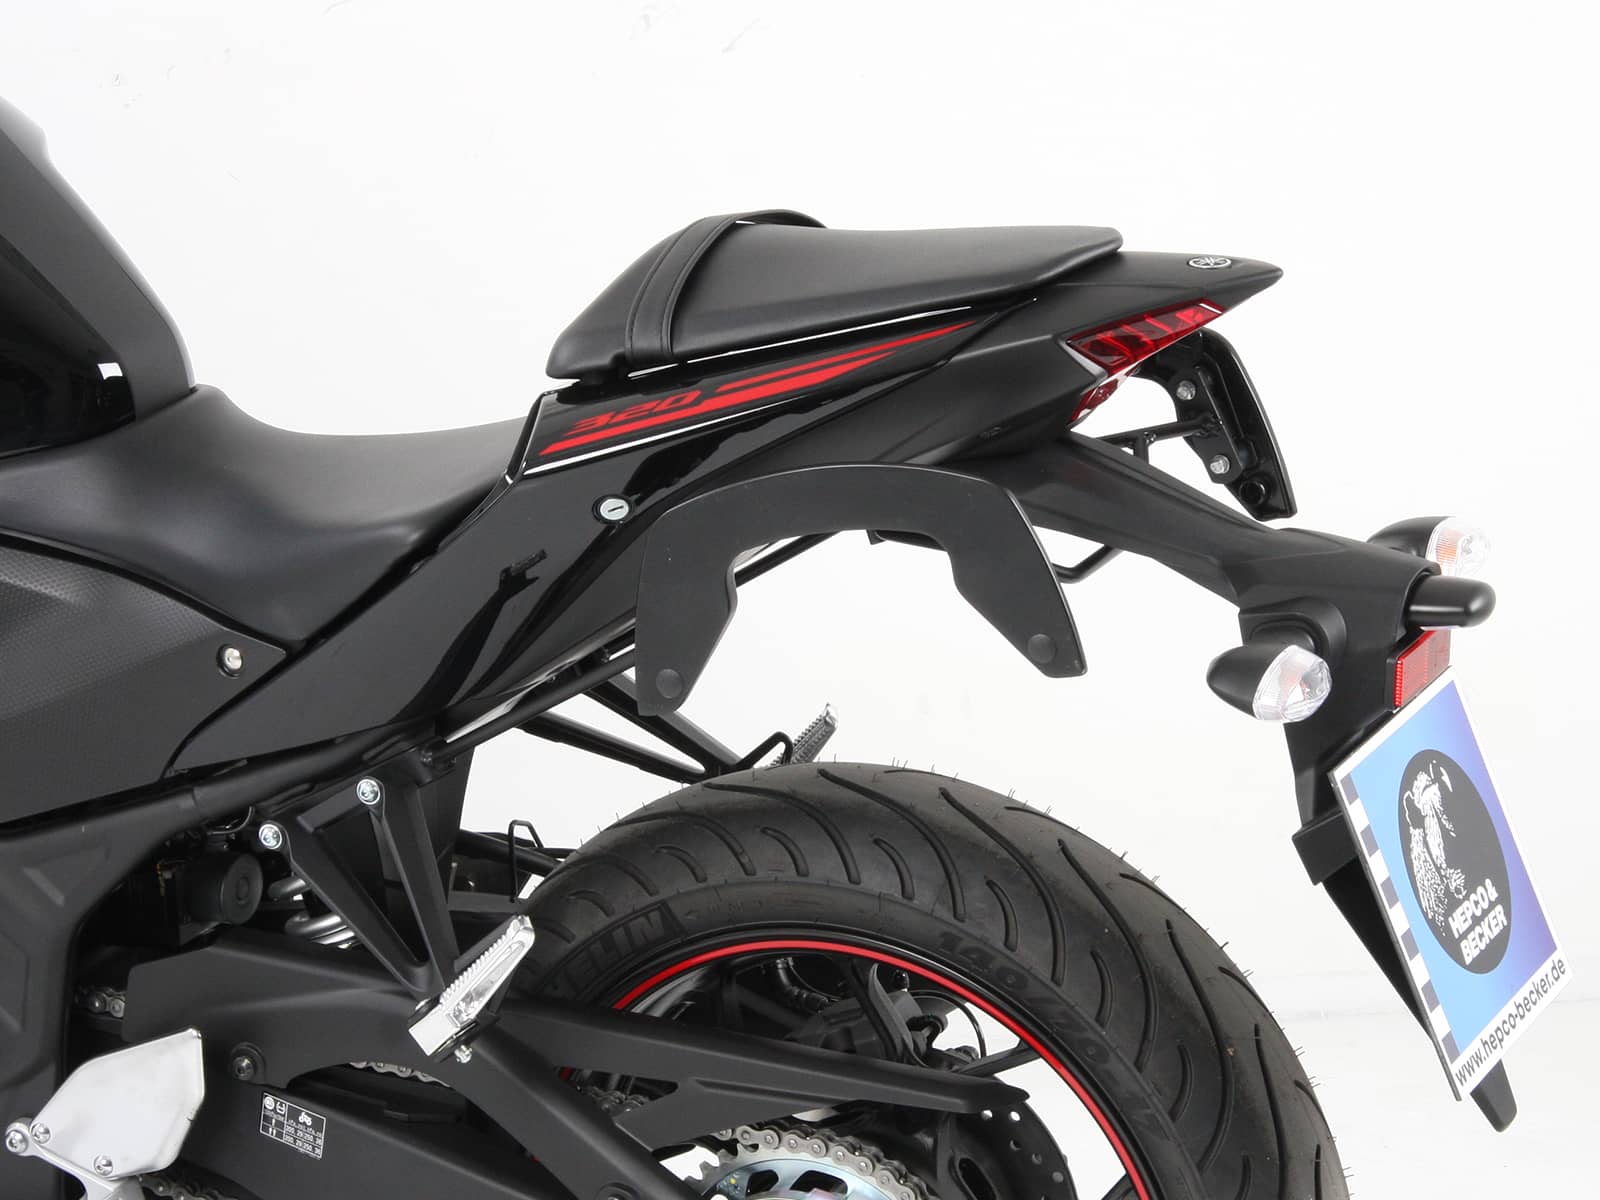 C-Bow sidecarrier for Yamaha YZF-R3 (2015-)